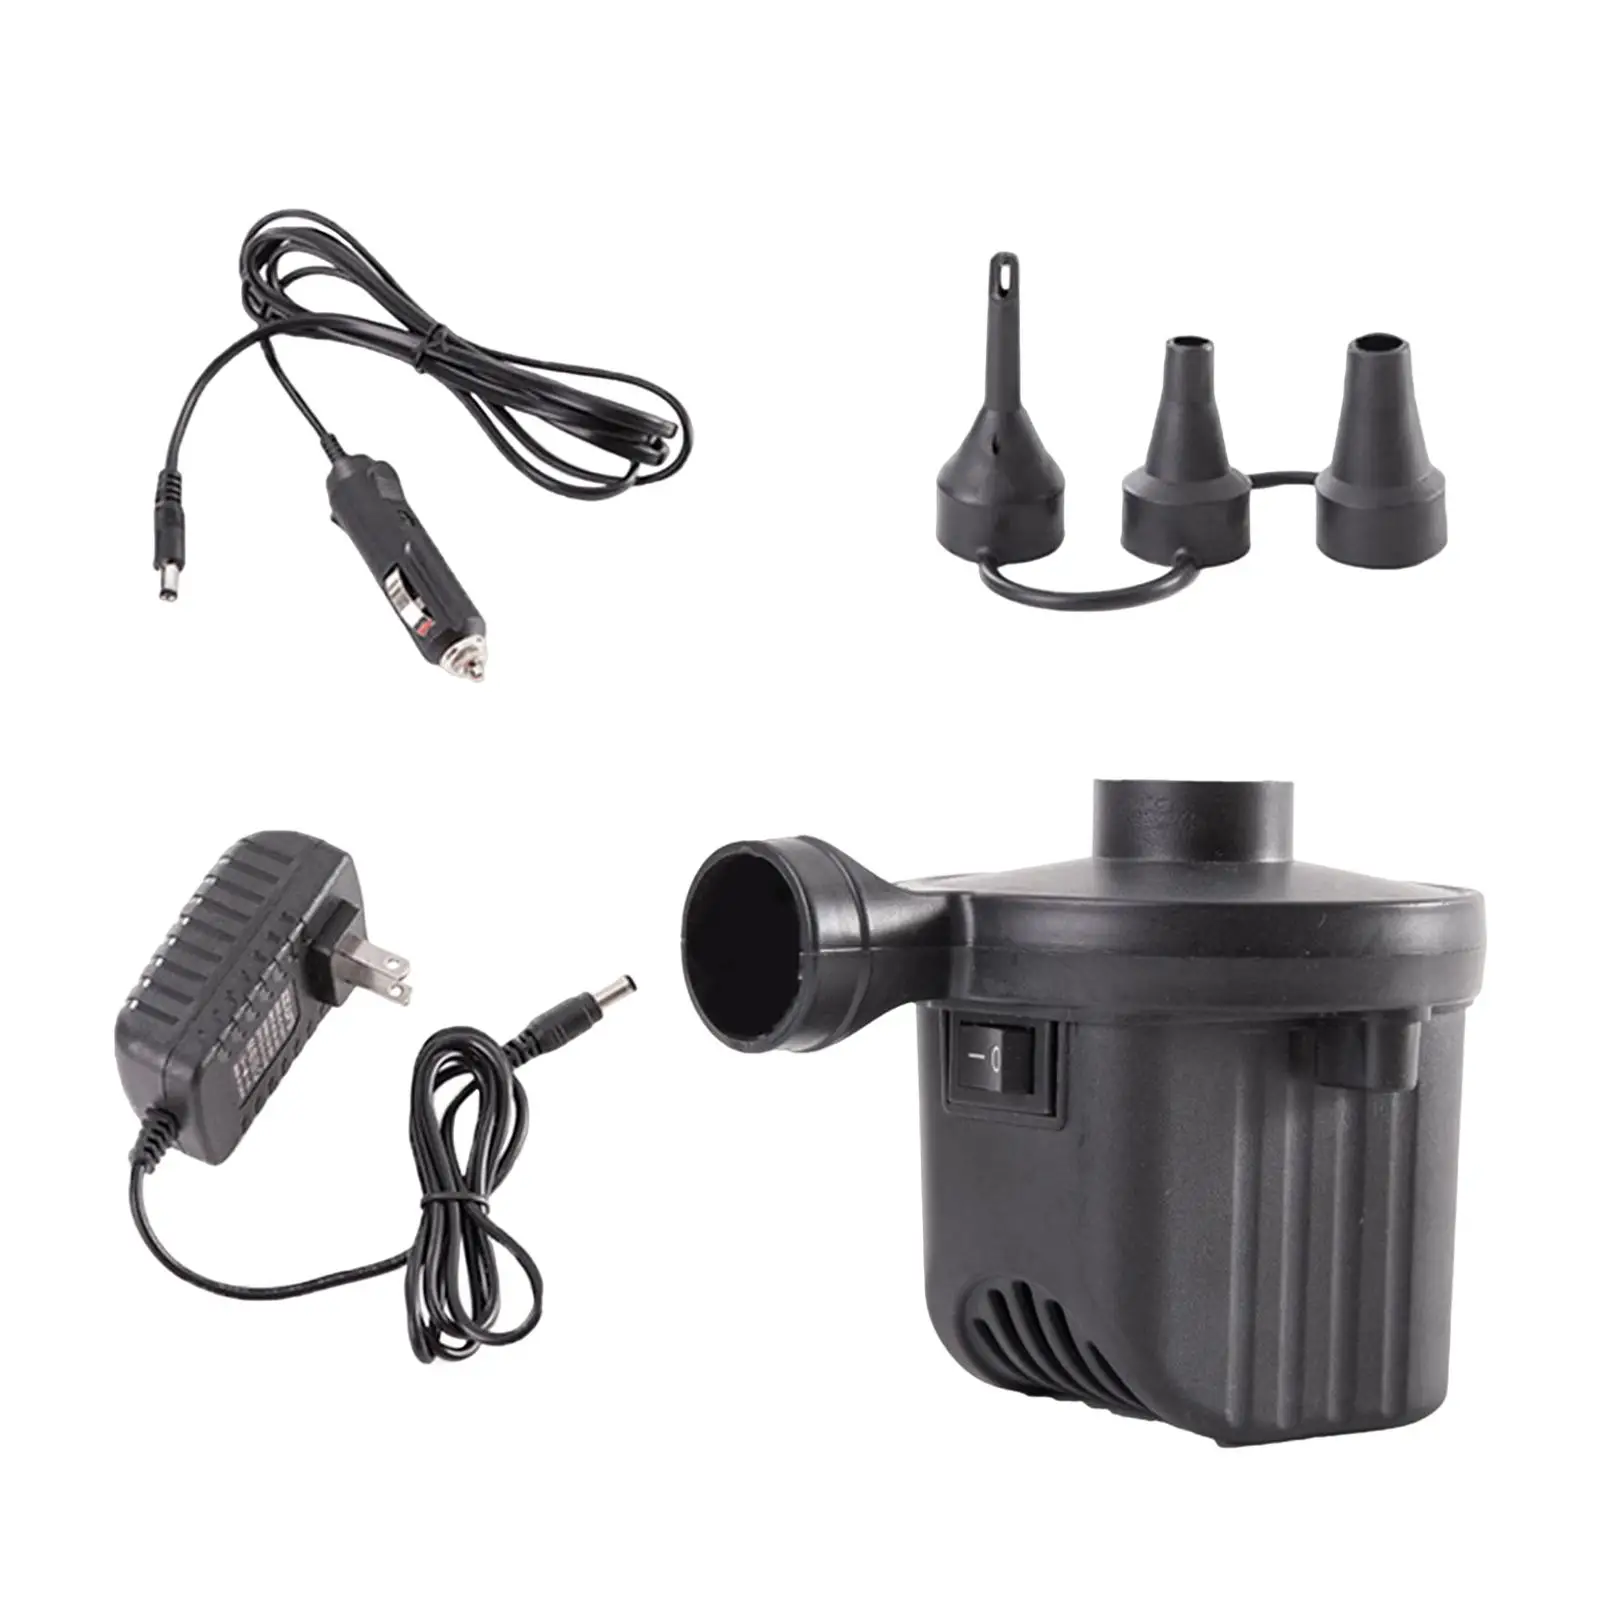 Portable Electric Air Pump with 3 Nozzles, Airbed Air Boat Deflatable Inflatable